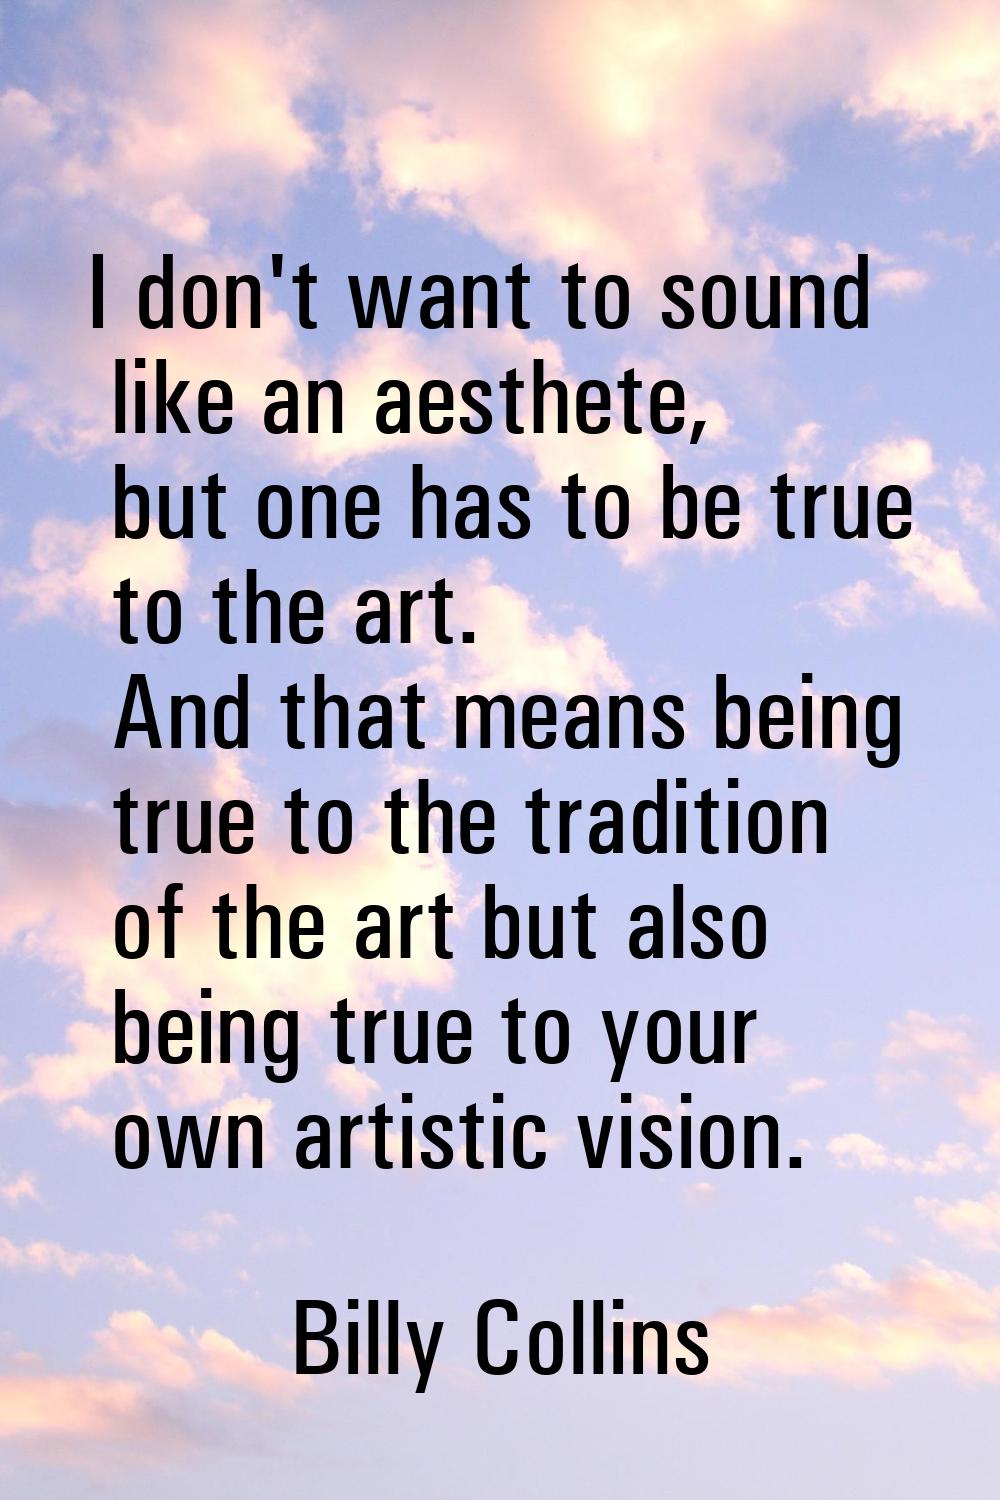 I don't want to sound like an aesthete, but one has to be true to the art. And that means being tru